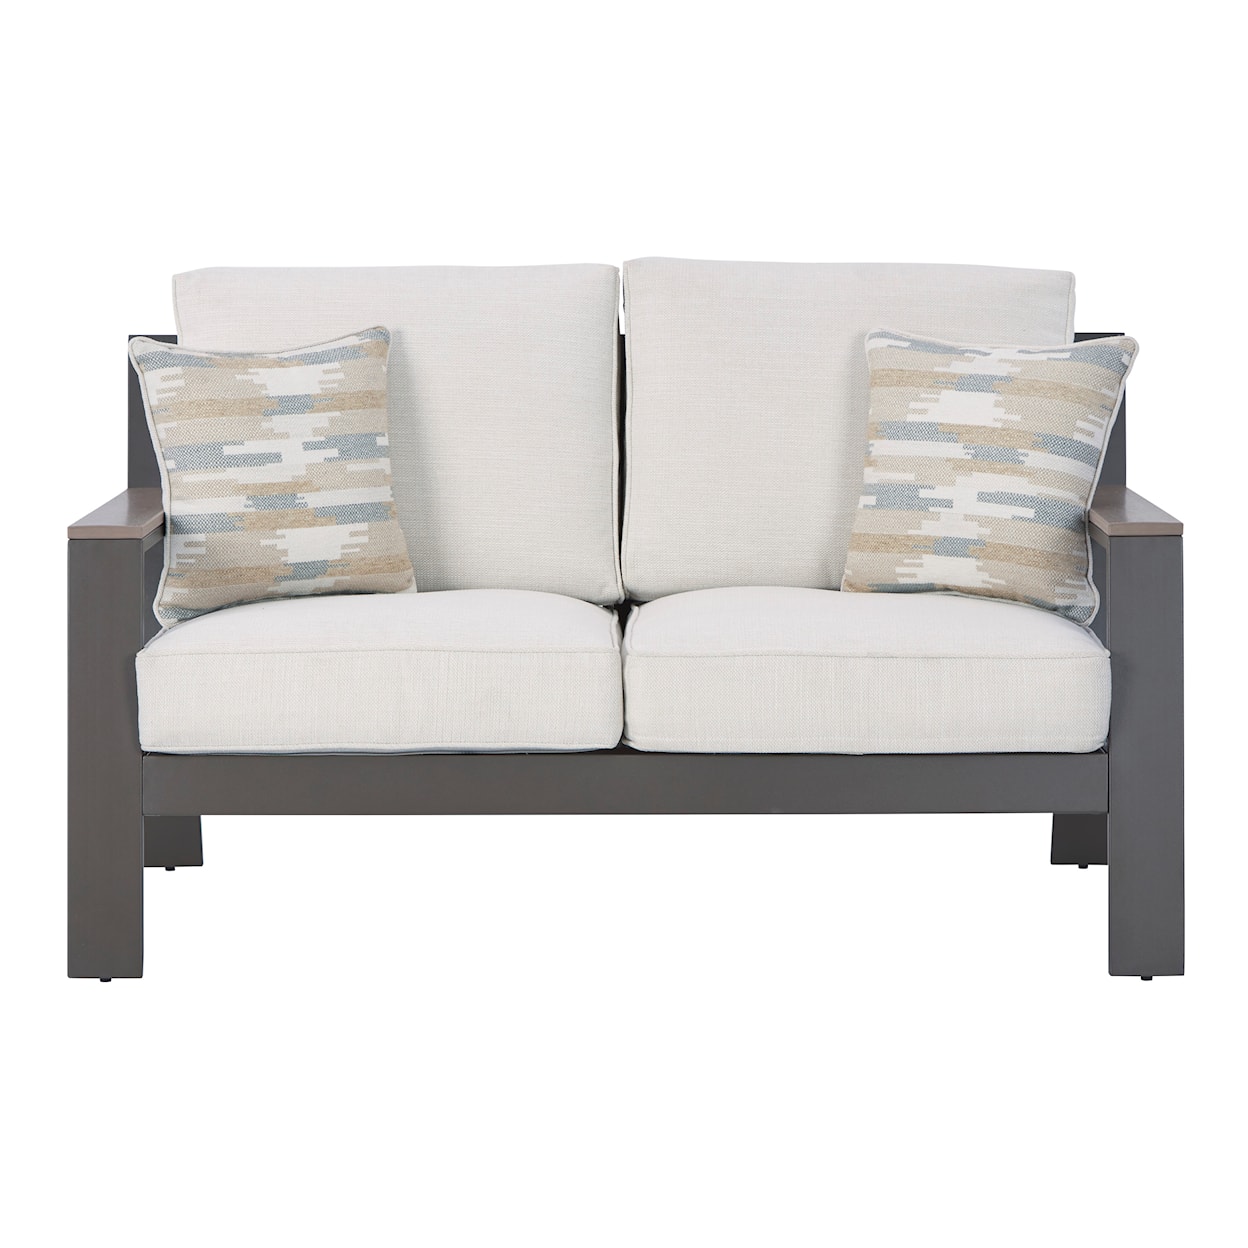 Signature Design by Ashley Tropicava Outdoor Loveseat with Cushion